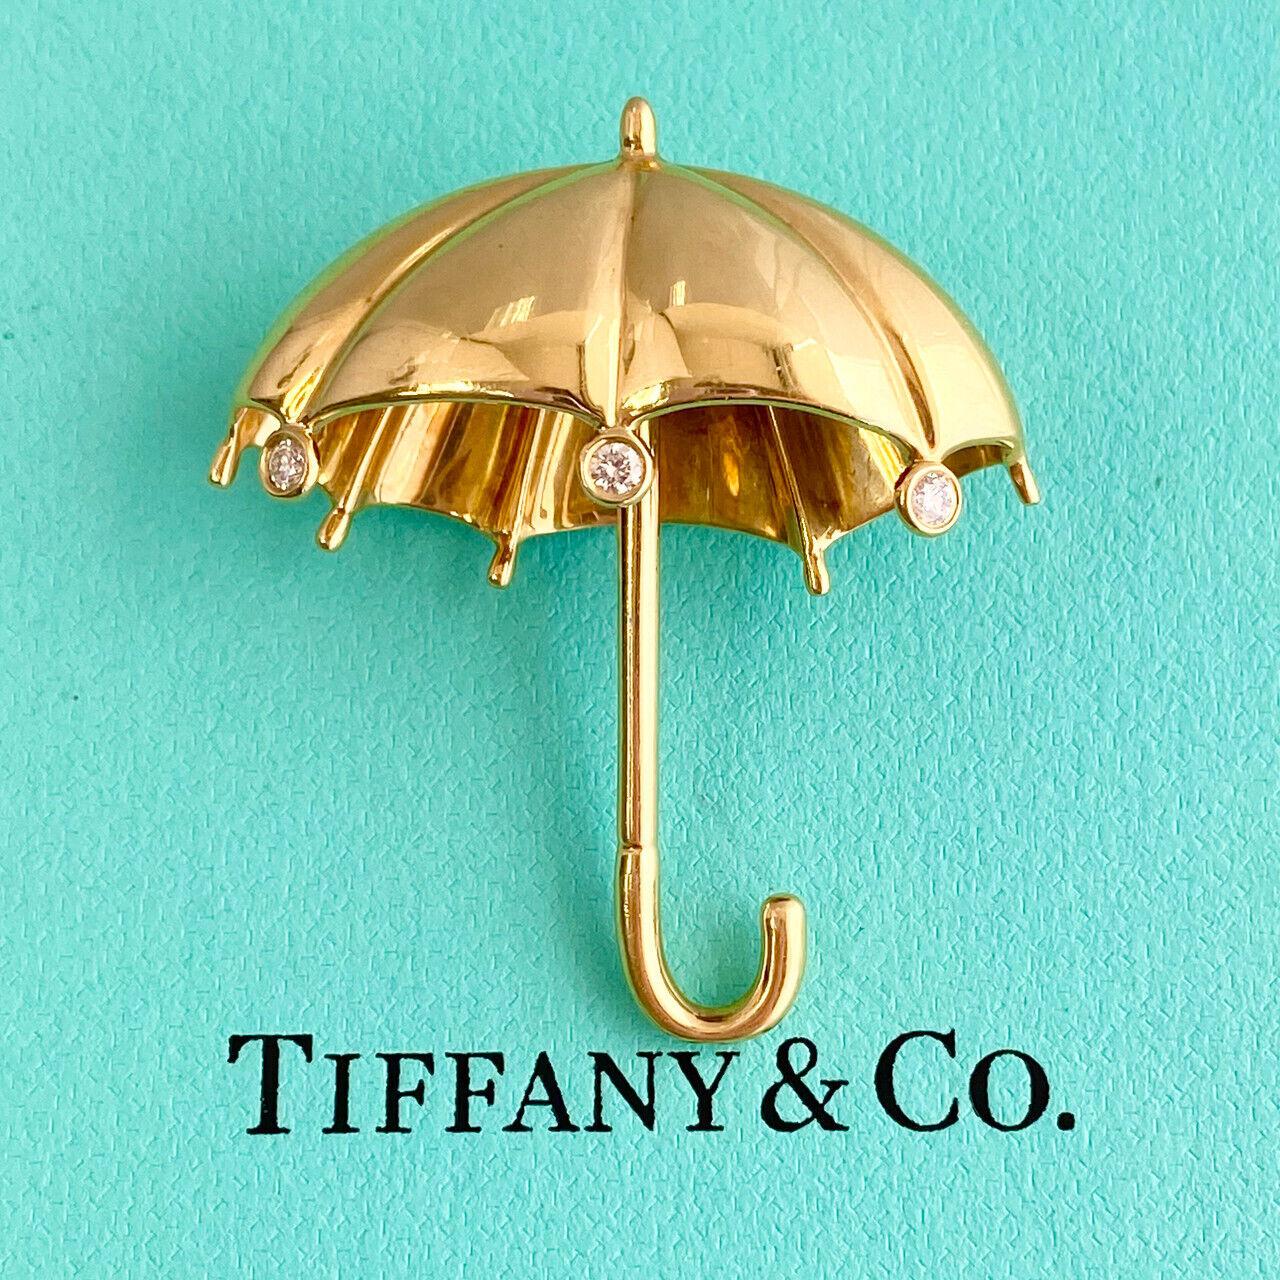 Specifications:
Pre-Owned (Great condition)
Brand: Tiffany & Co
Metal: 18K (Au 79.80-75%) Gold
Weight: 13.4 Gr
Main Stone: 3ps Round Diamonds (2mm each)